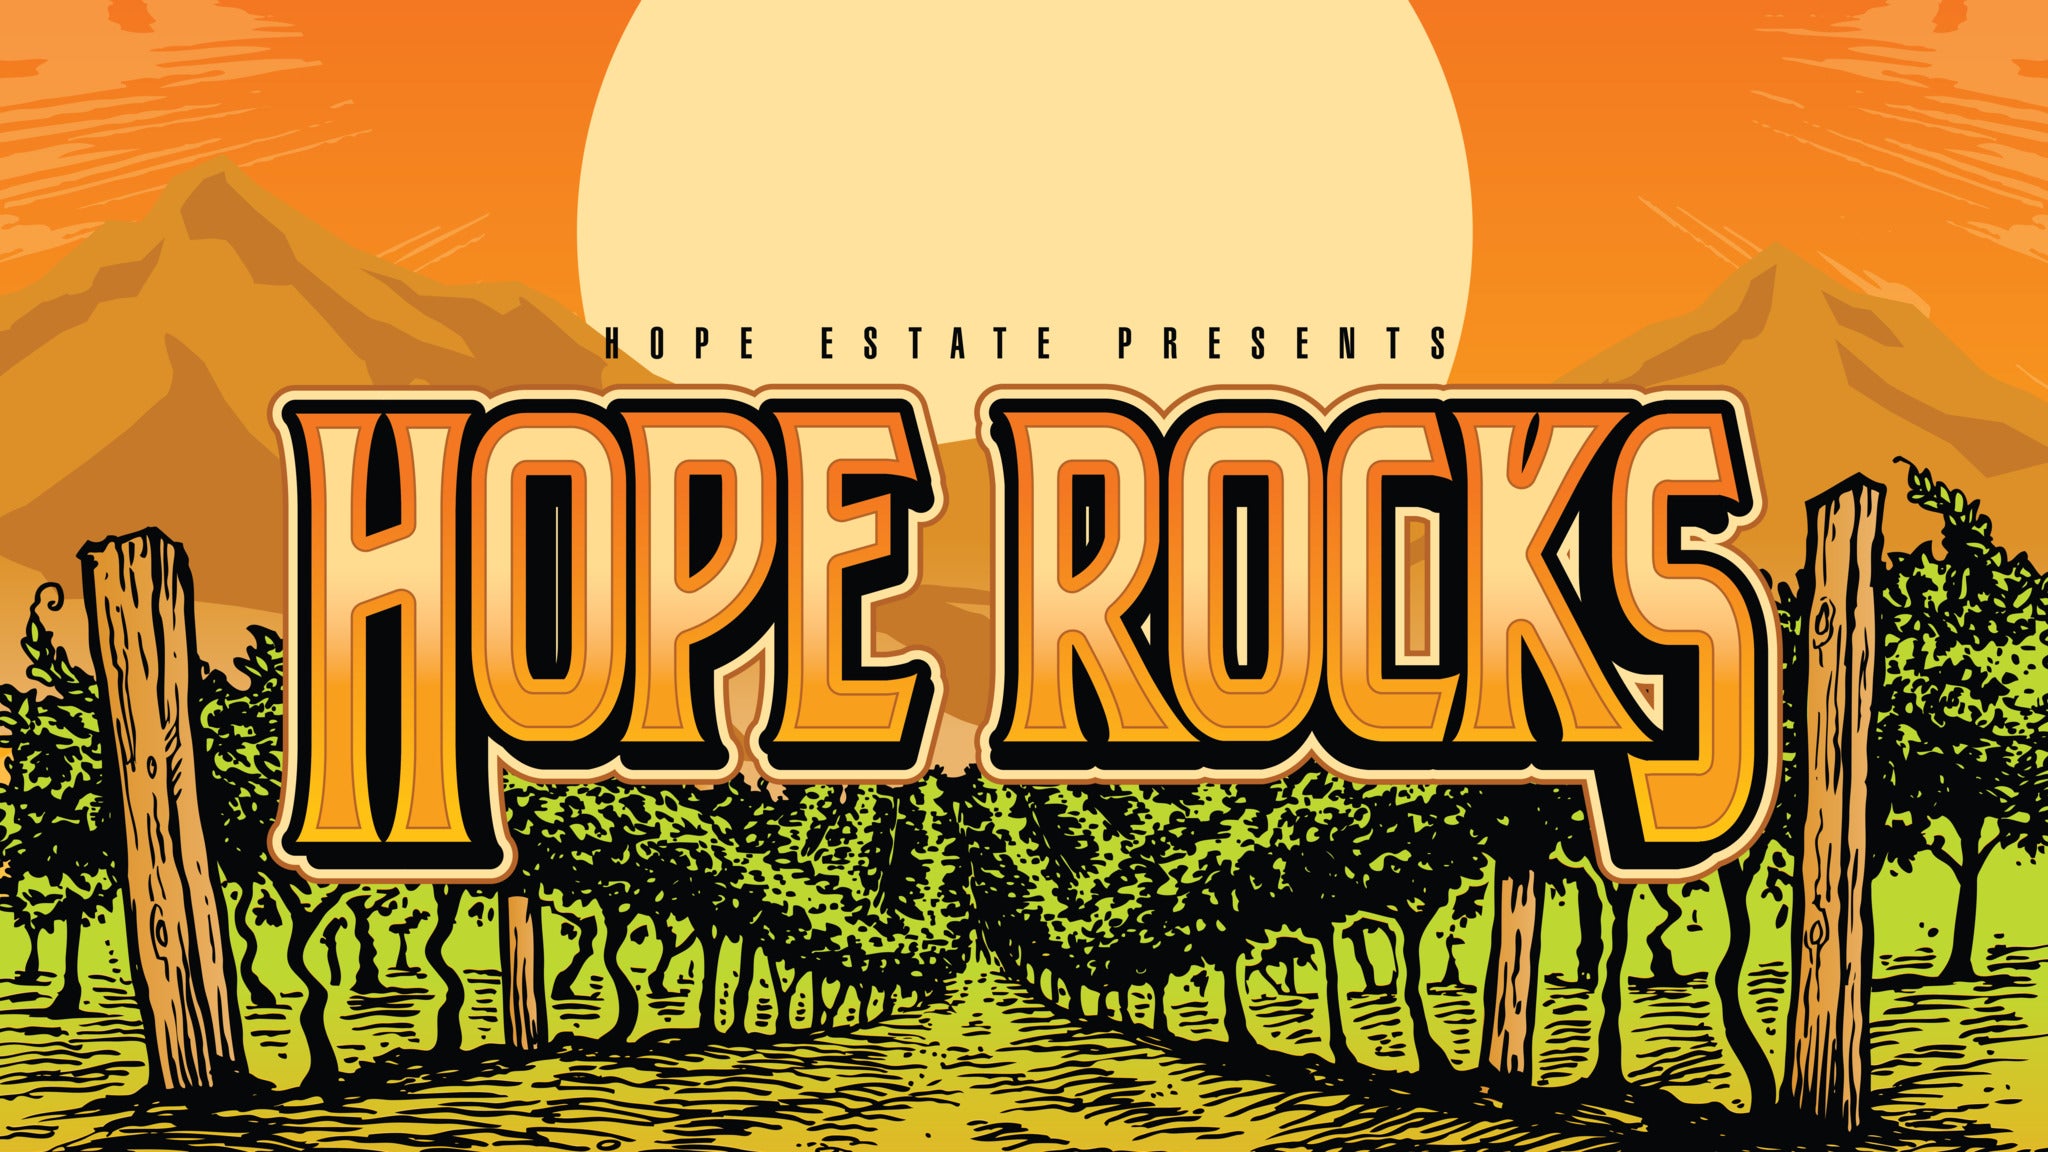 Image used with permission from Ticketmaster | Hope Rocks tickets